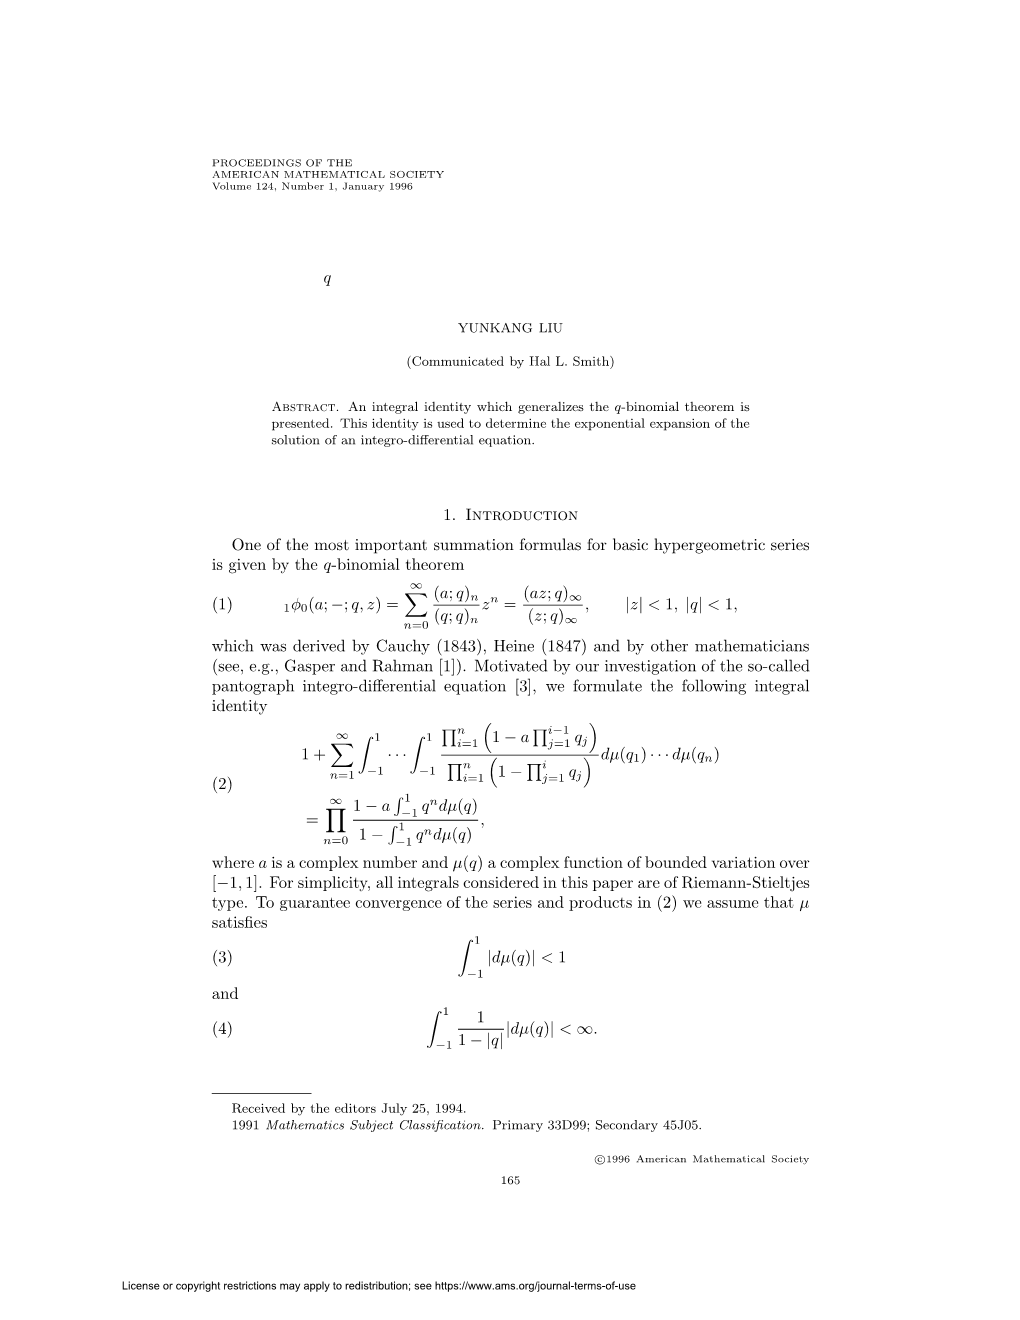 AN INTEGRAL GENERALIZATION of the Q-BINOMIAL THEOREM and an APPLICATION